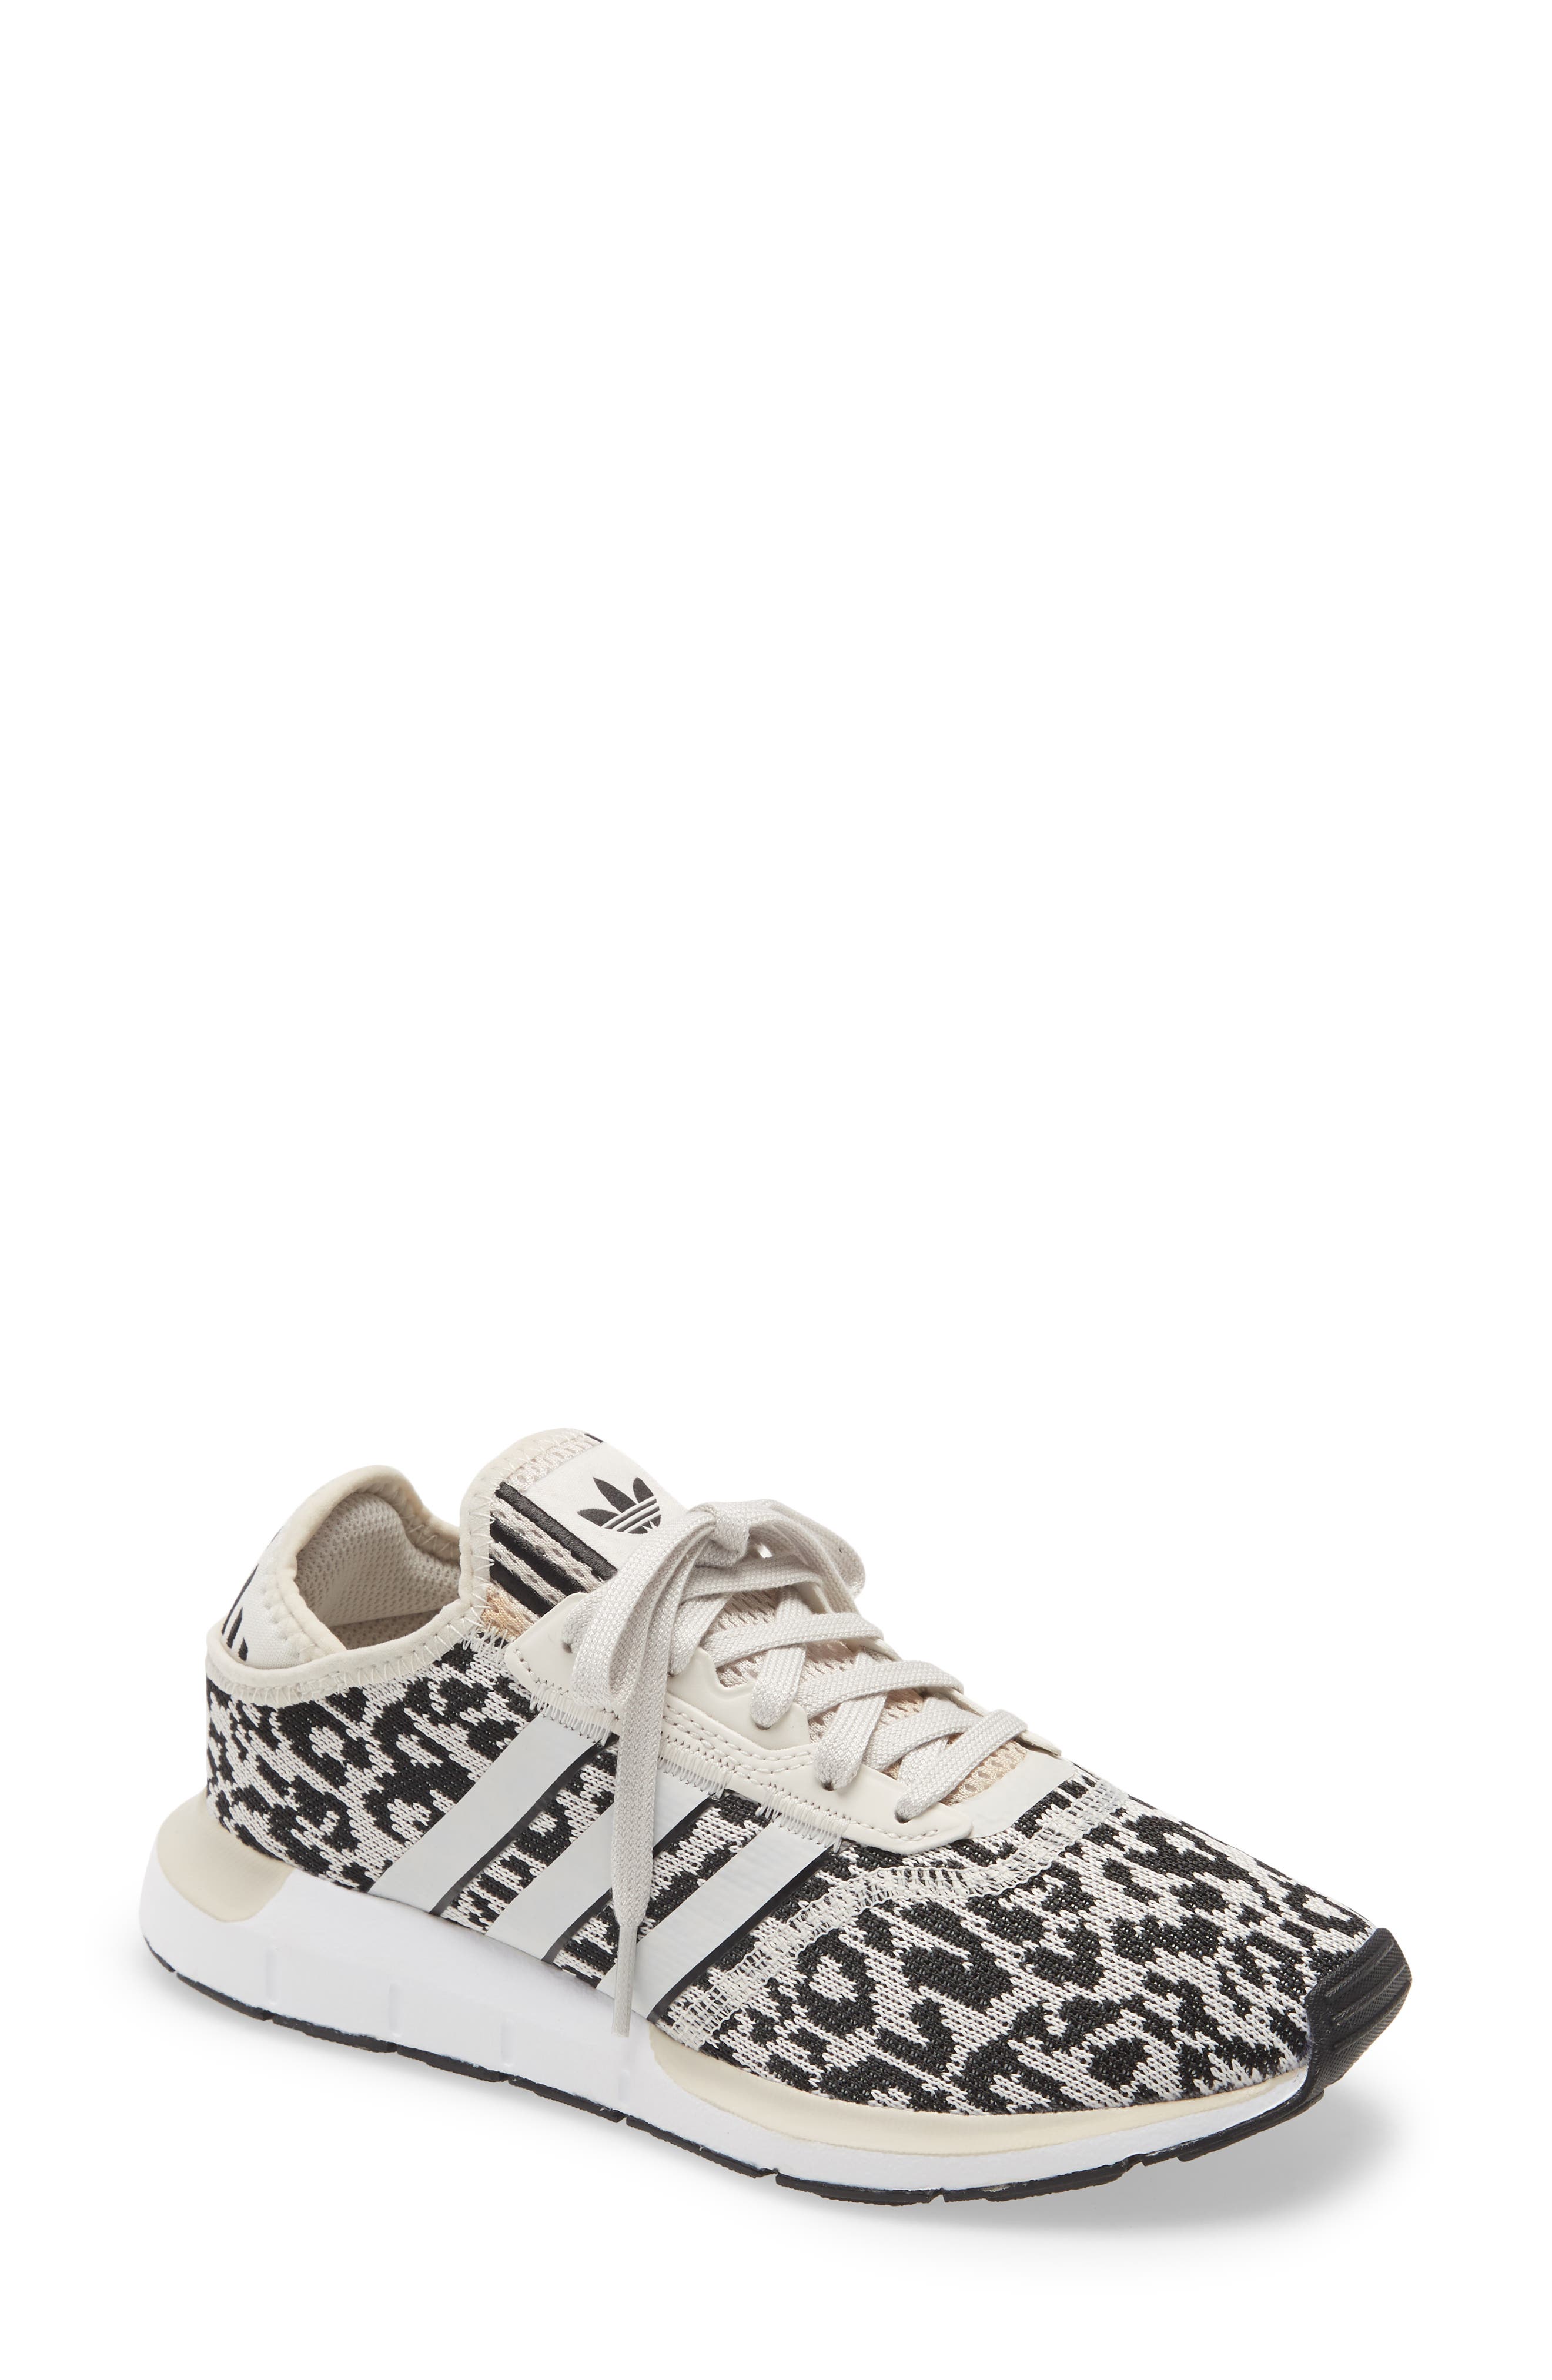 adidas leopard shoes nordstrom